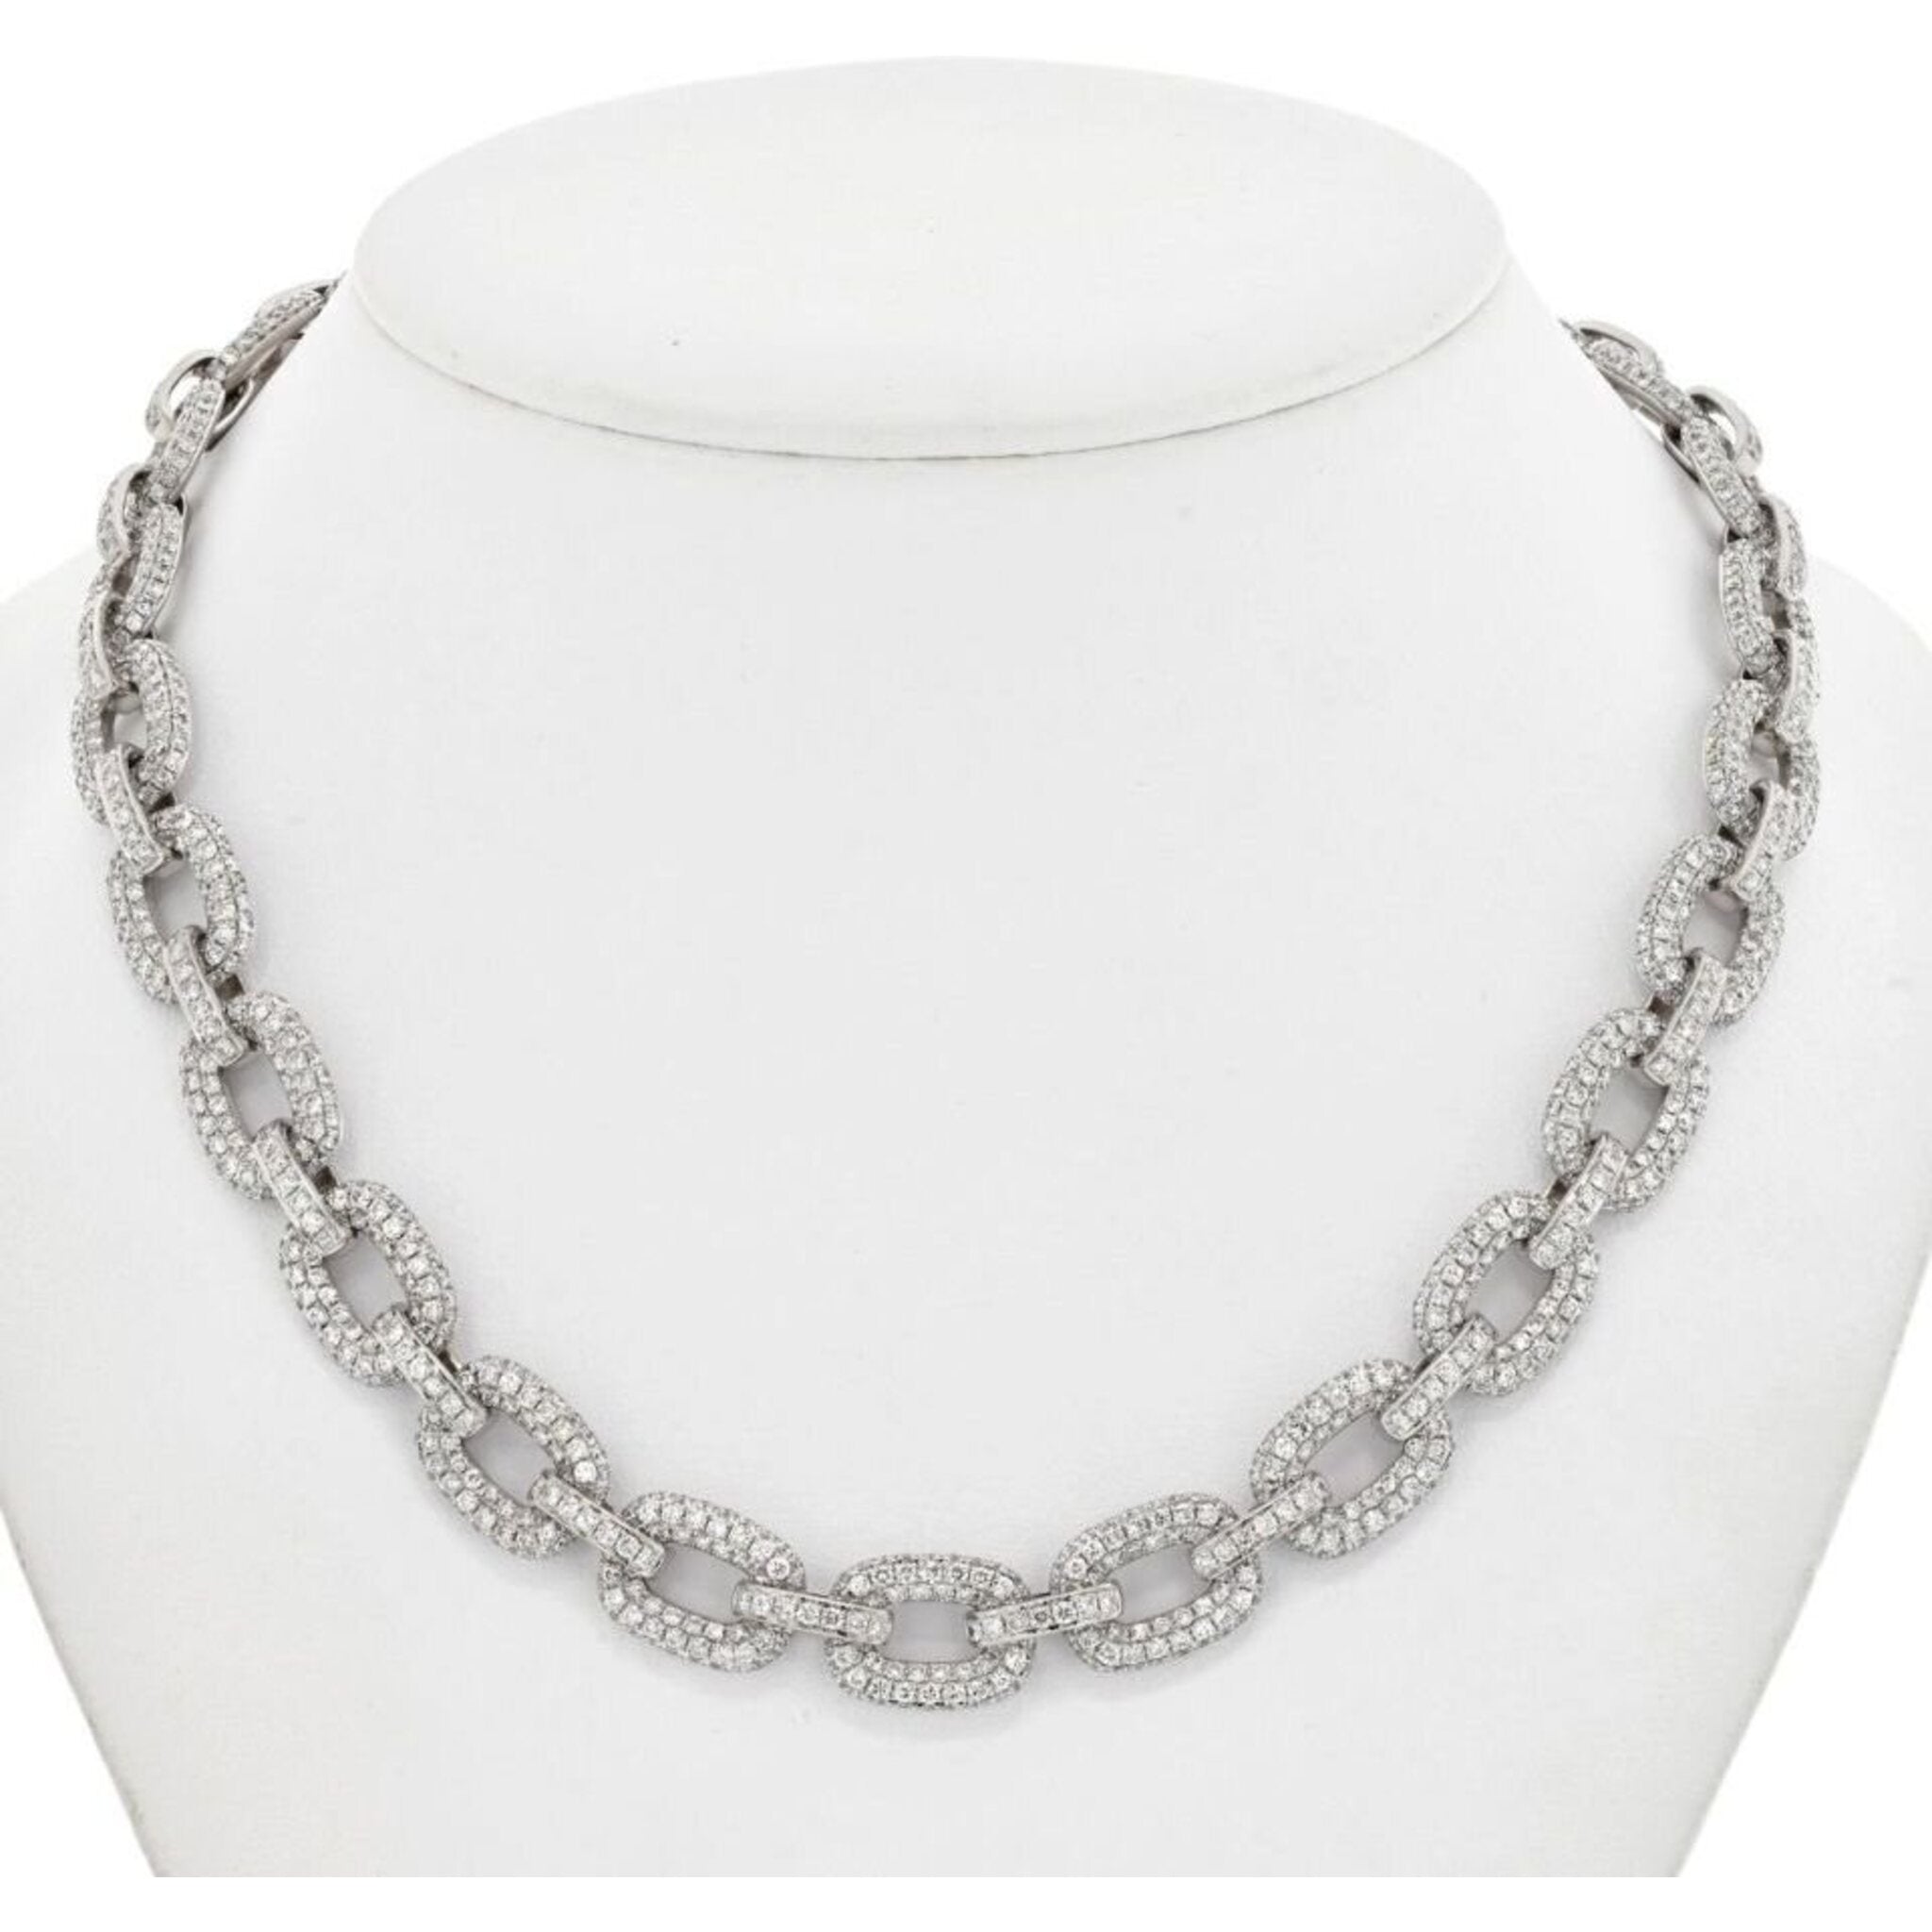 Shrimps Chunky Chain Necklace Sterling Silver – Daisy London